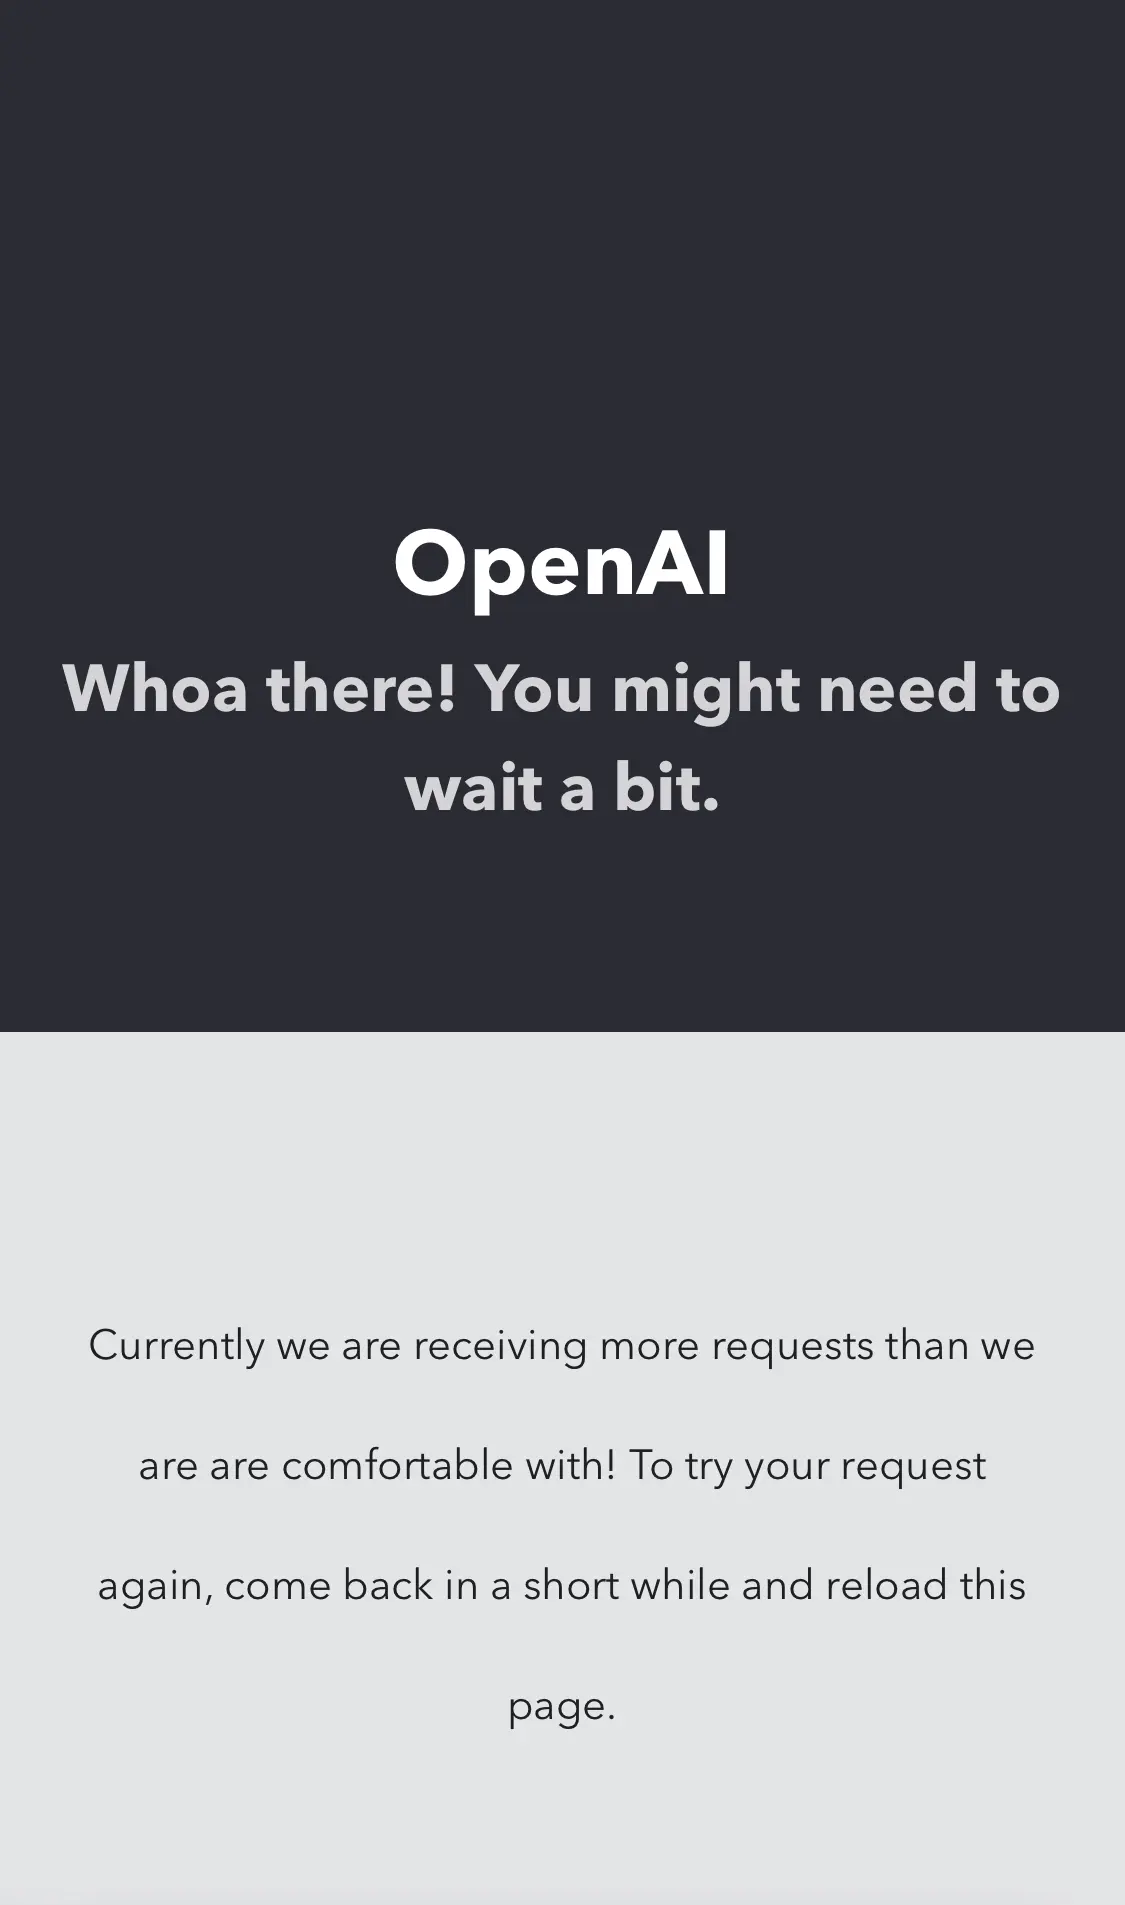 OpenAIWhoa there! You might need to wait a bit.Currently we are receiving more requests than we are are comfortable with! To try your request again, come back in a short while and reload this page.